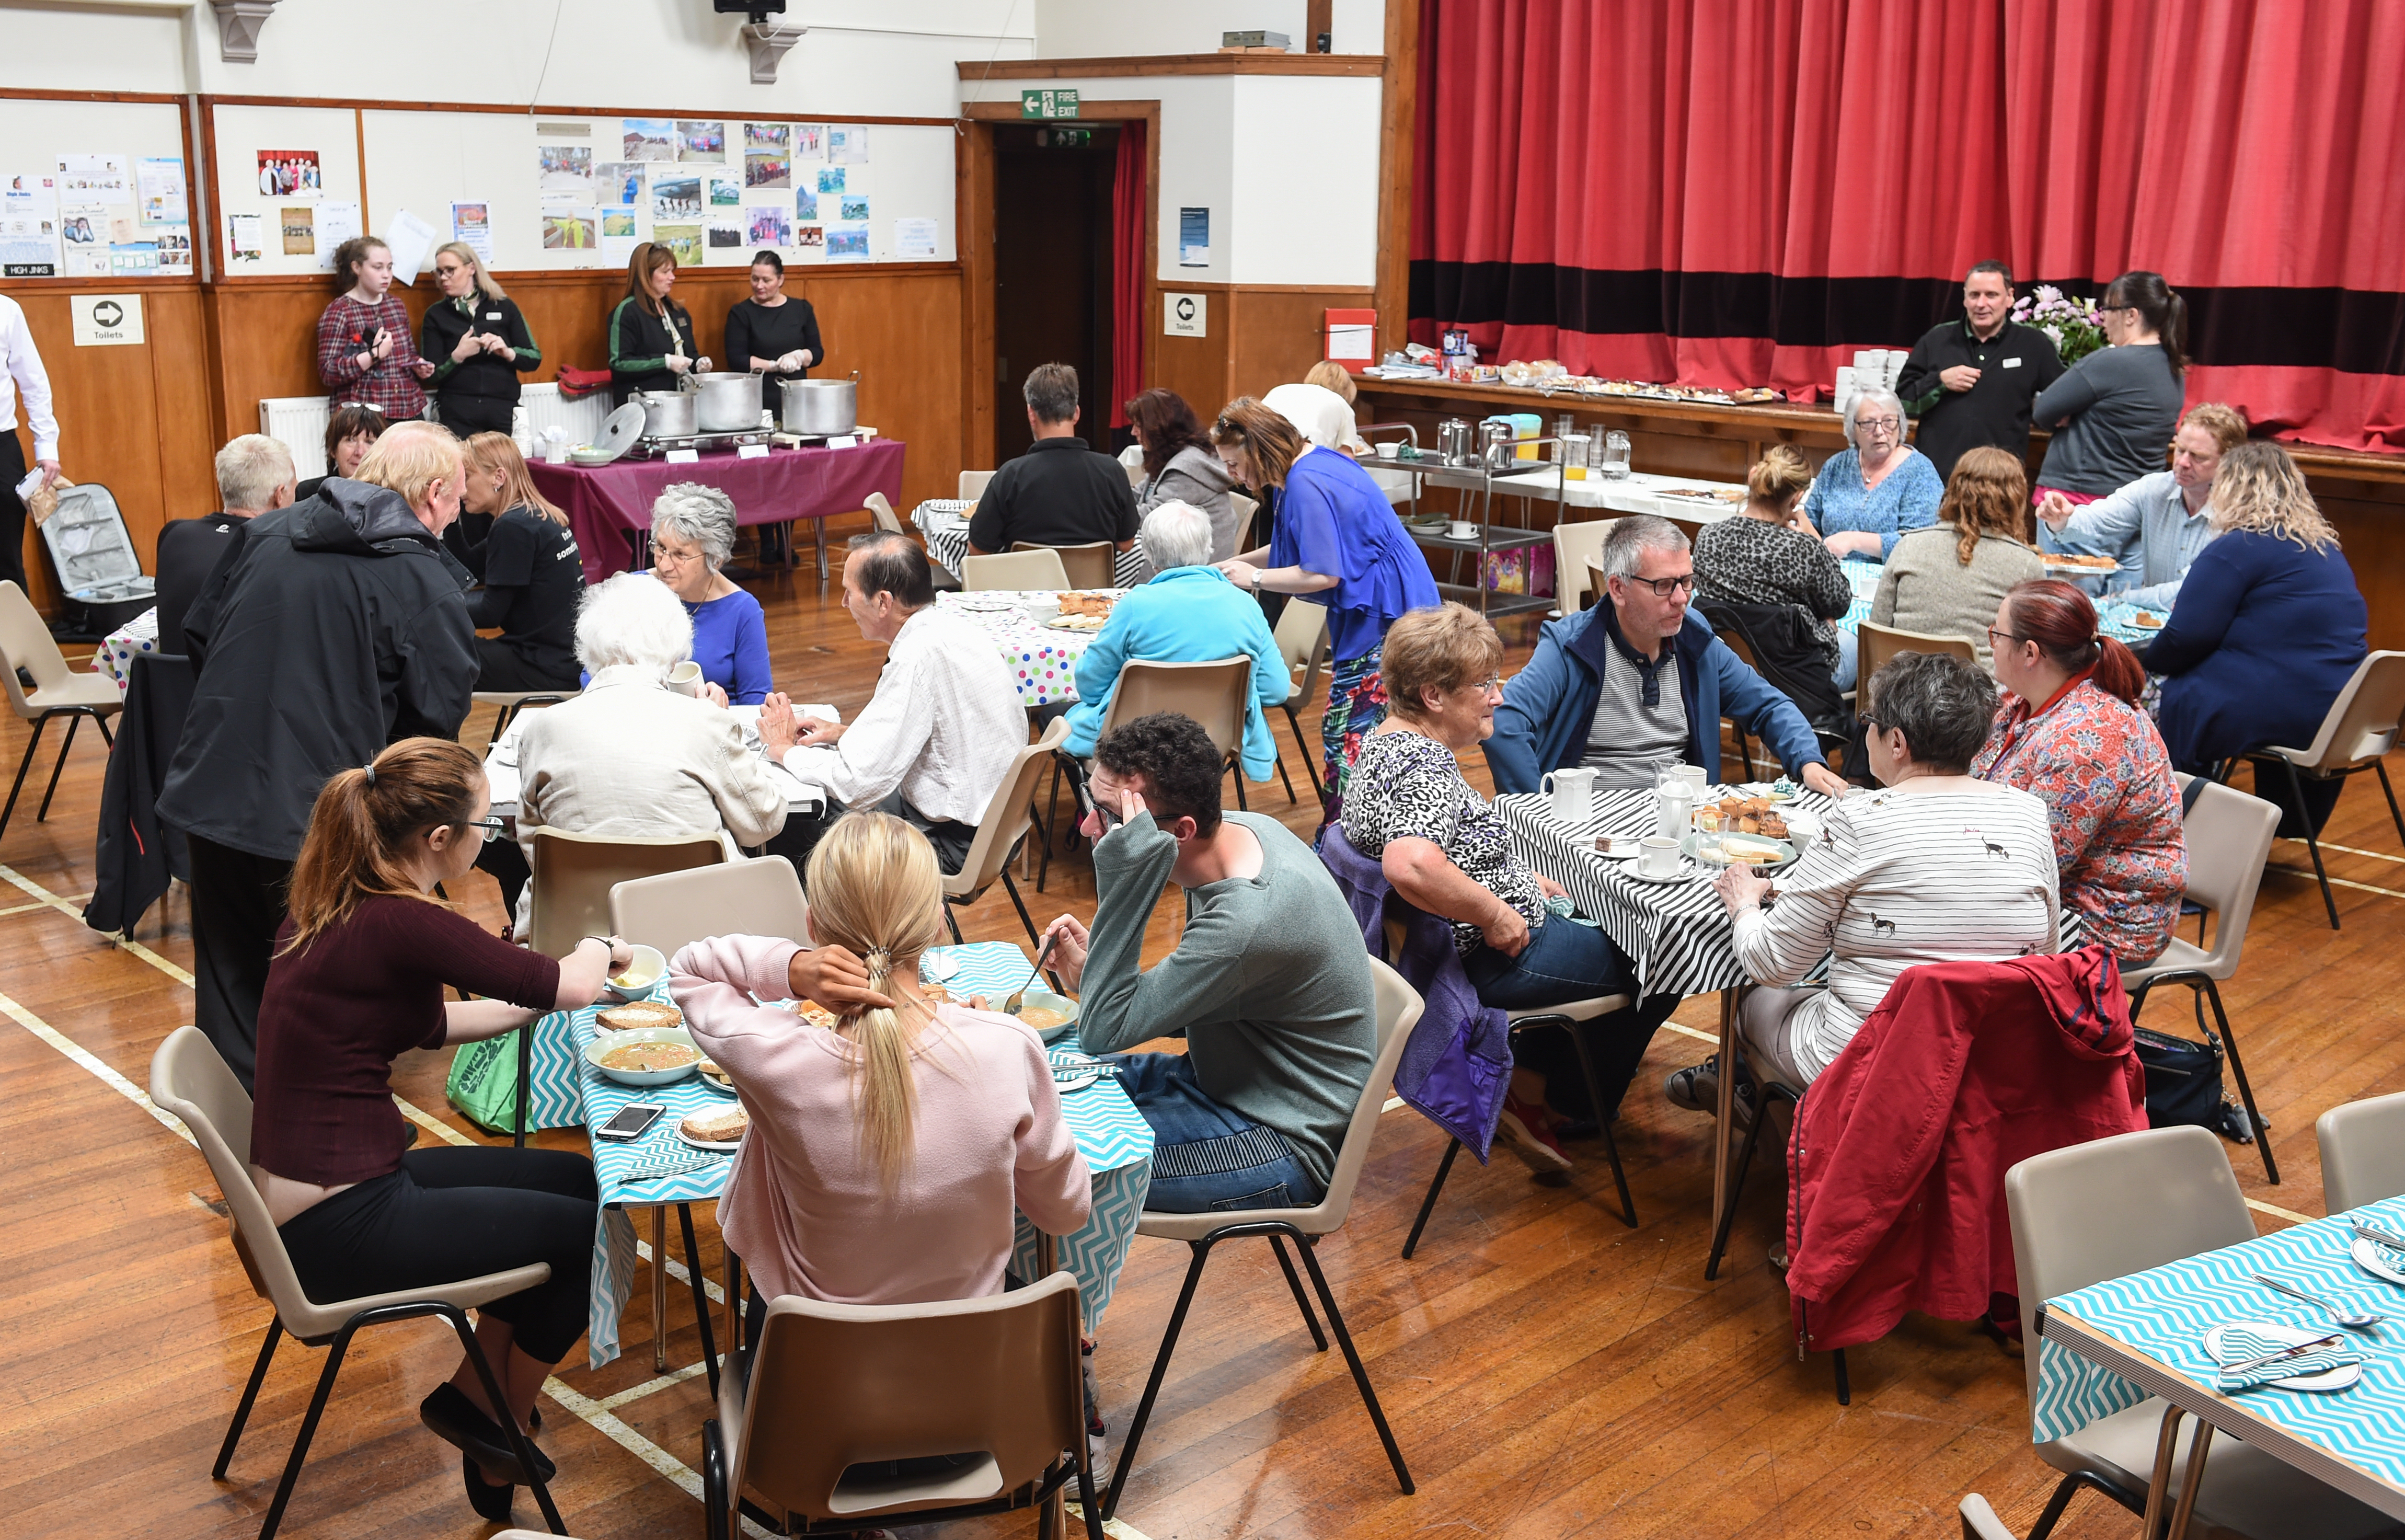 A community meal organised by Moray Foodbank at Elgin High Church in the summer 2018